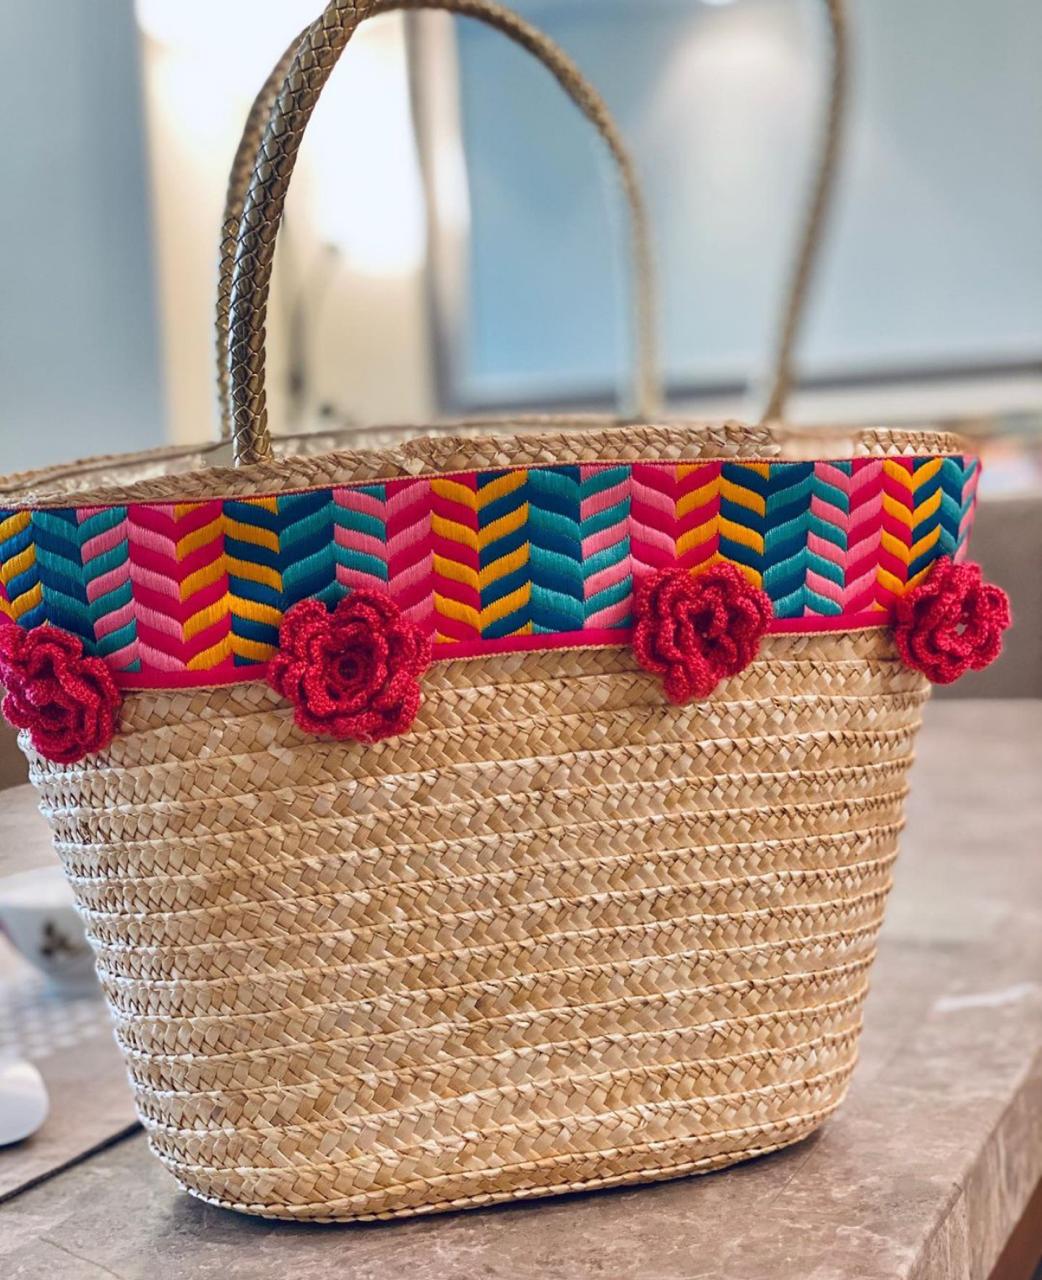 Basket with Dantelle and pink flower crochet